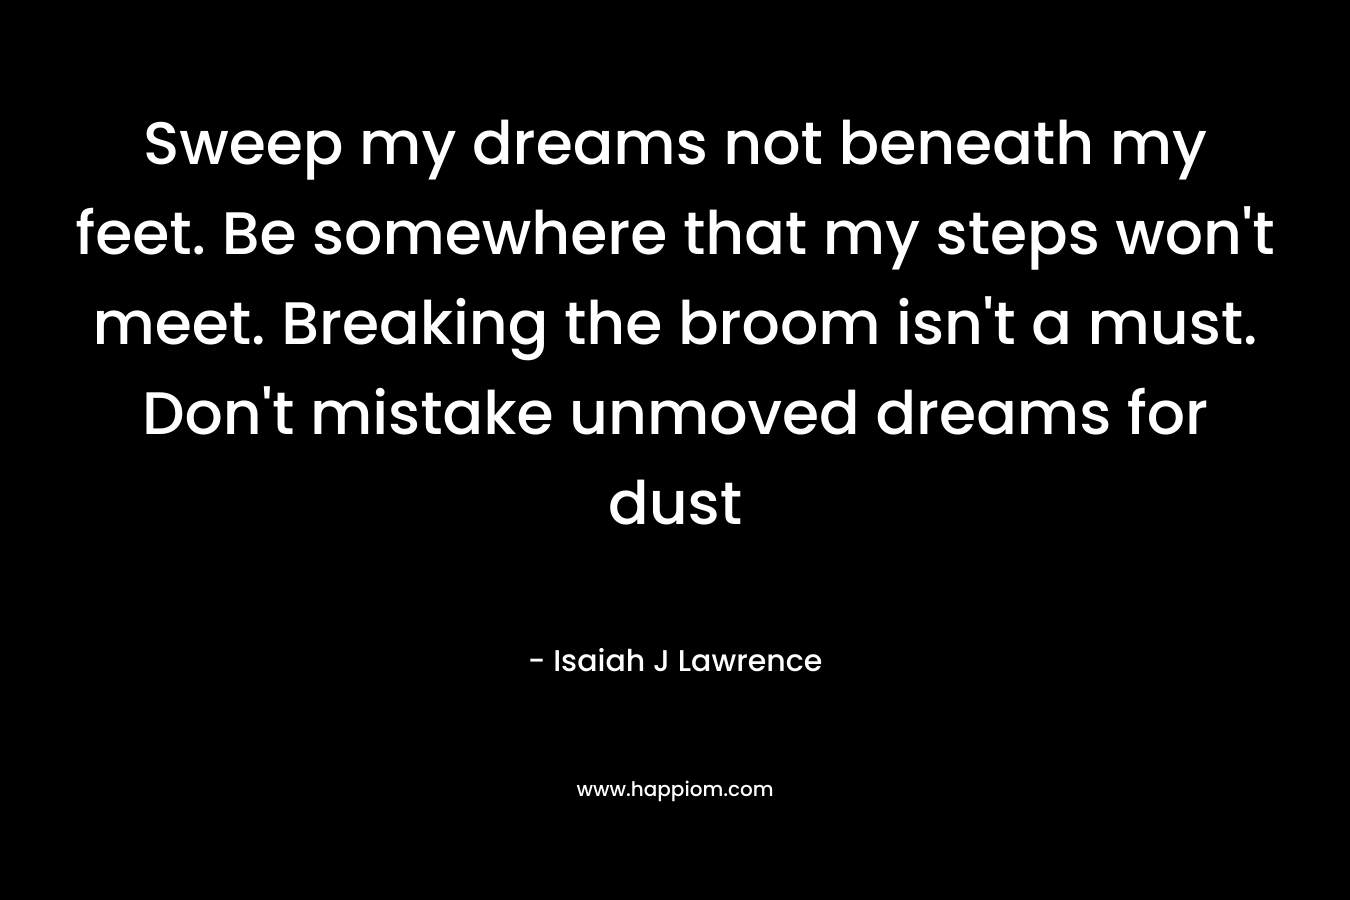 Sweep my dreams not beneath my feet. Be somewhere that my steps won’t meet. Breaking the broom isn’t a must. Don’t mistake unmoved dreams for dust – Isaiah J Lawrence